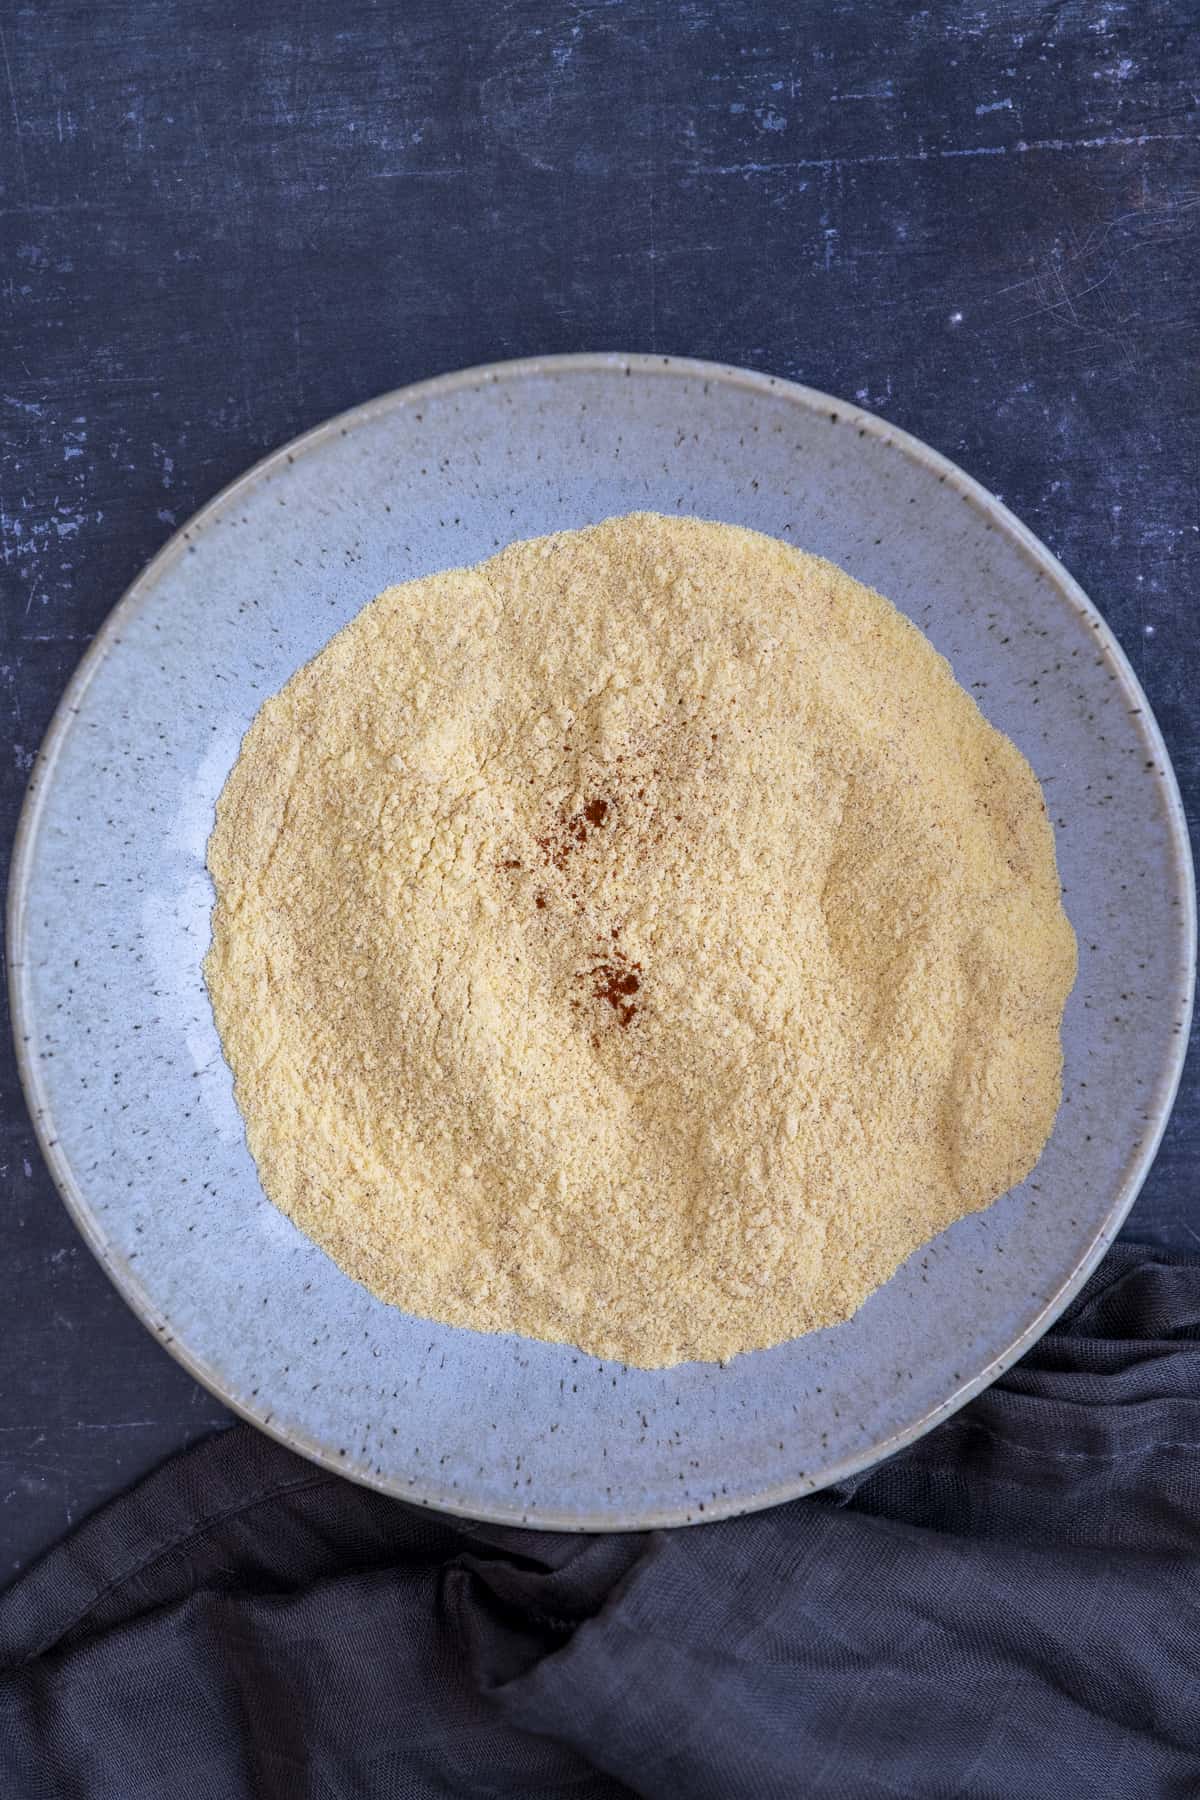 Cornmeal mixture in a blue bowl.